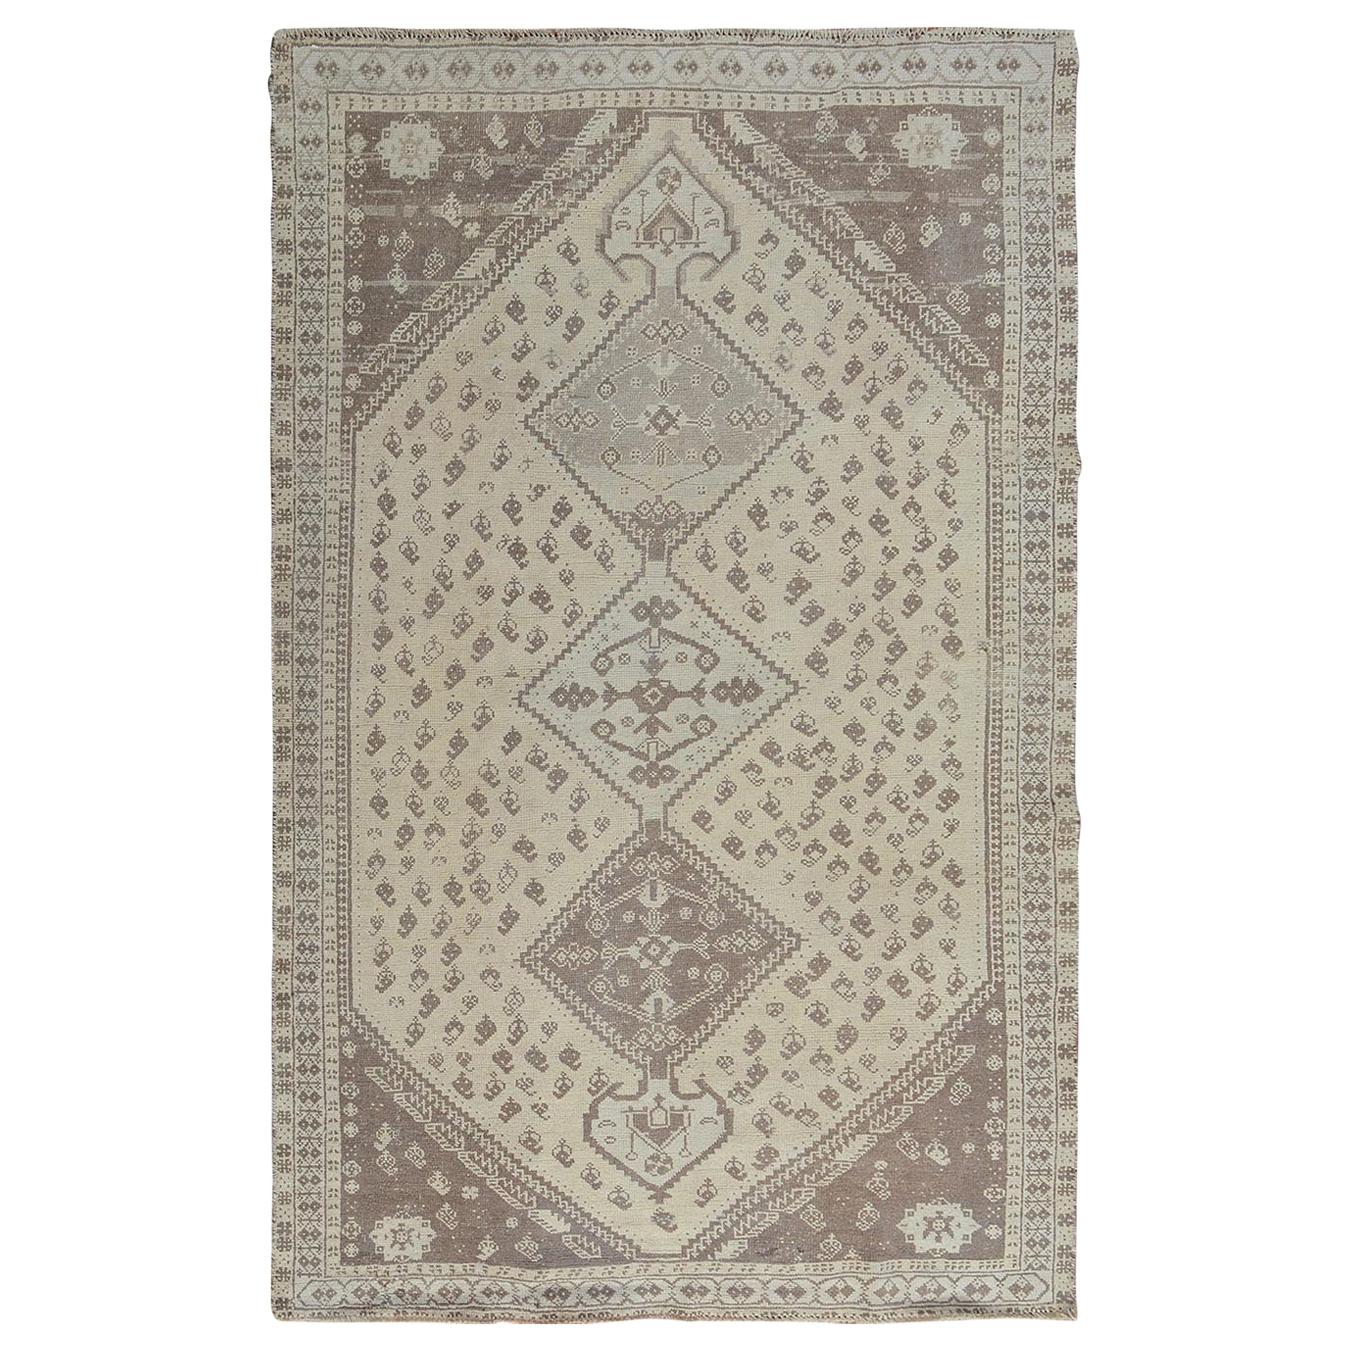 Natural Colors Vintage and Worn Down Persian Shiraz Pure Wool Hand Knotted Rug